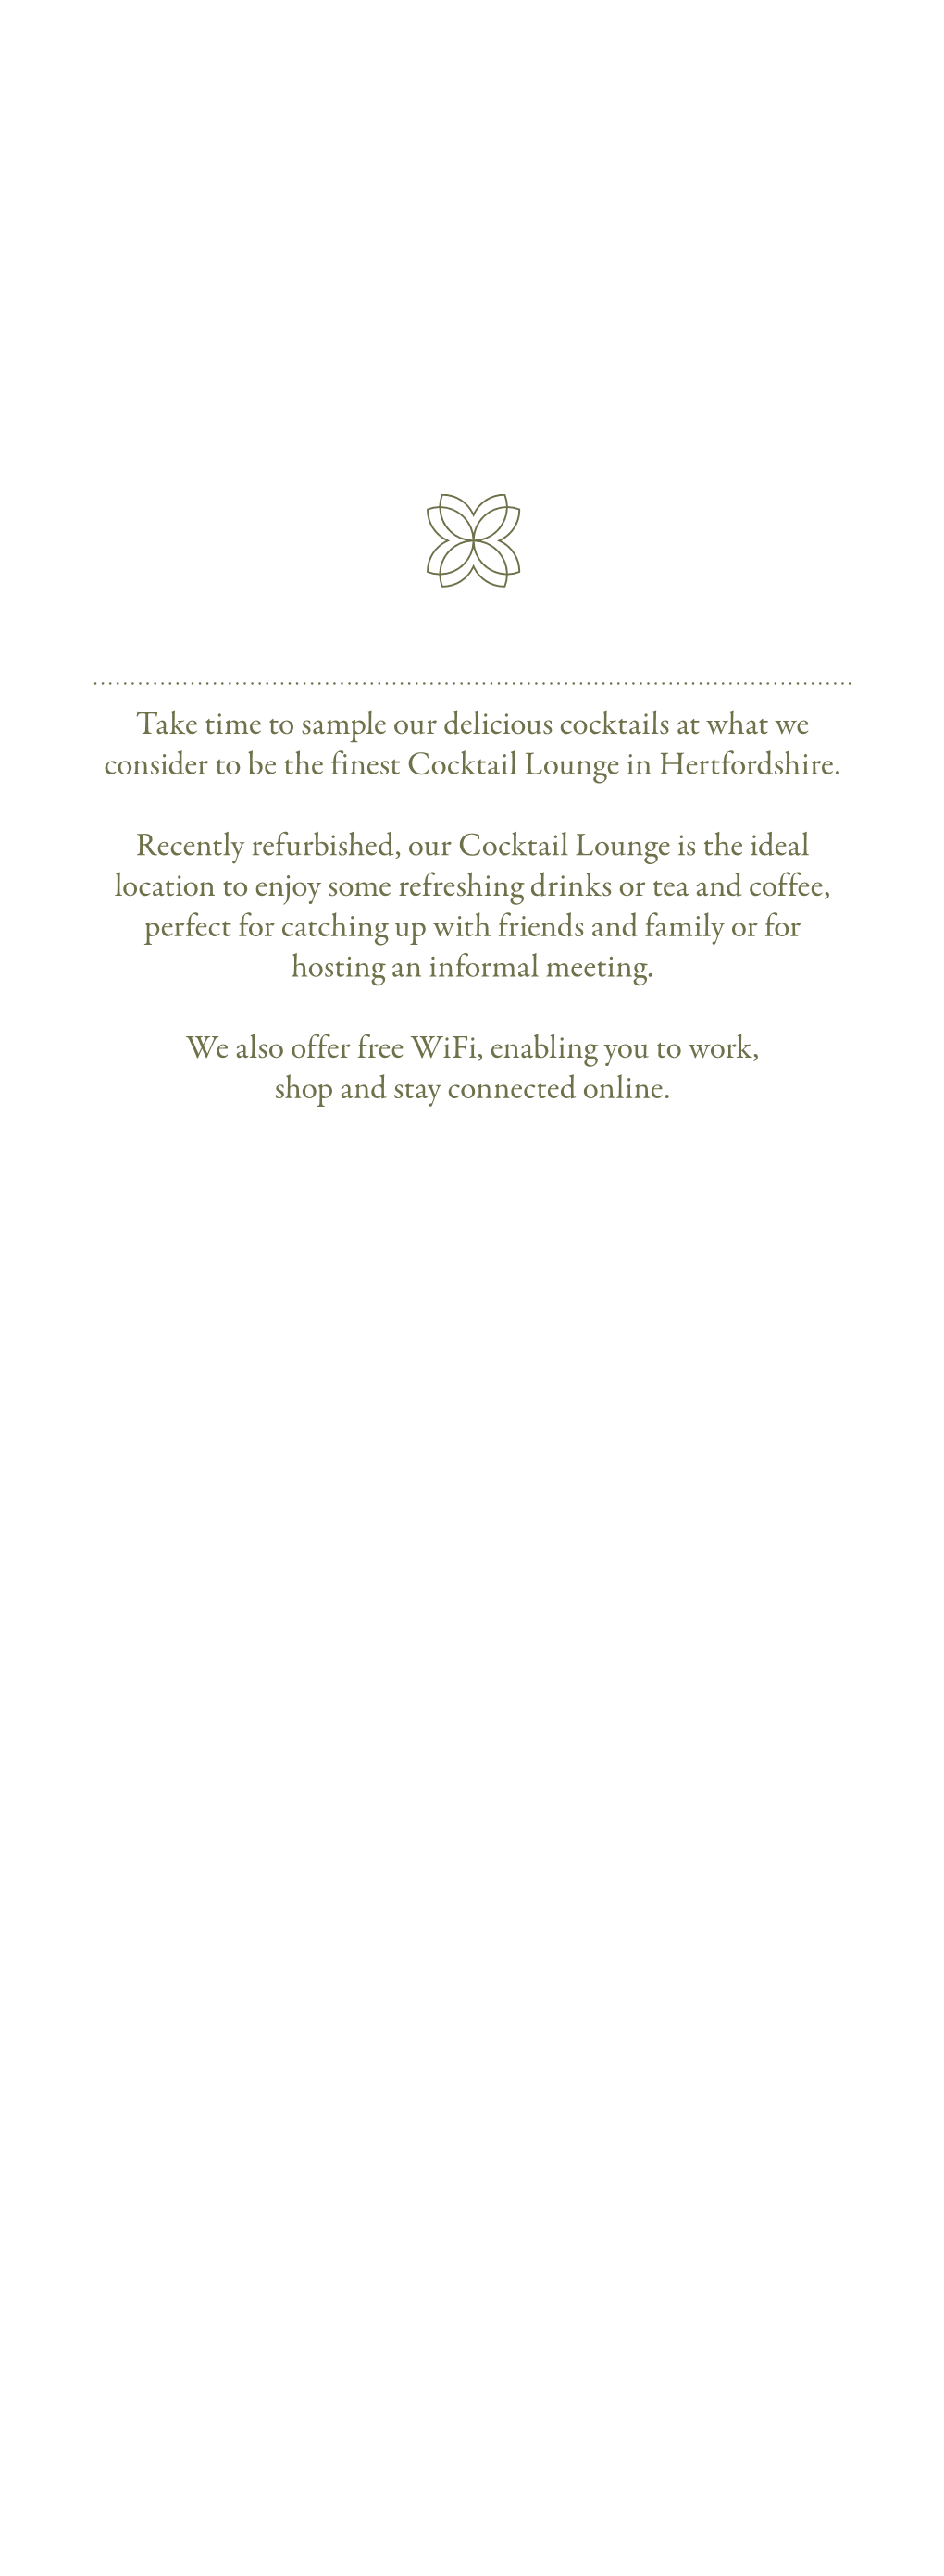 Take Time to Sample Our Delicious Cocktails at What We Consider to Be the Finest Cocktail Lounge in Hertfordshire